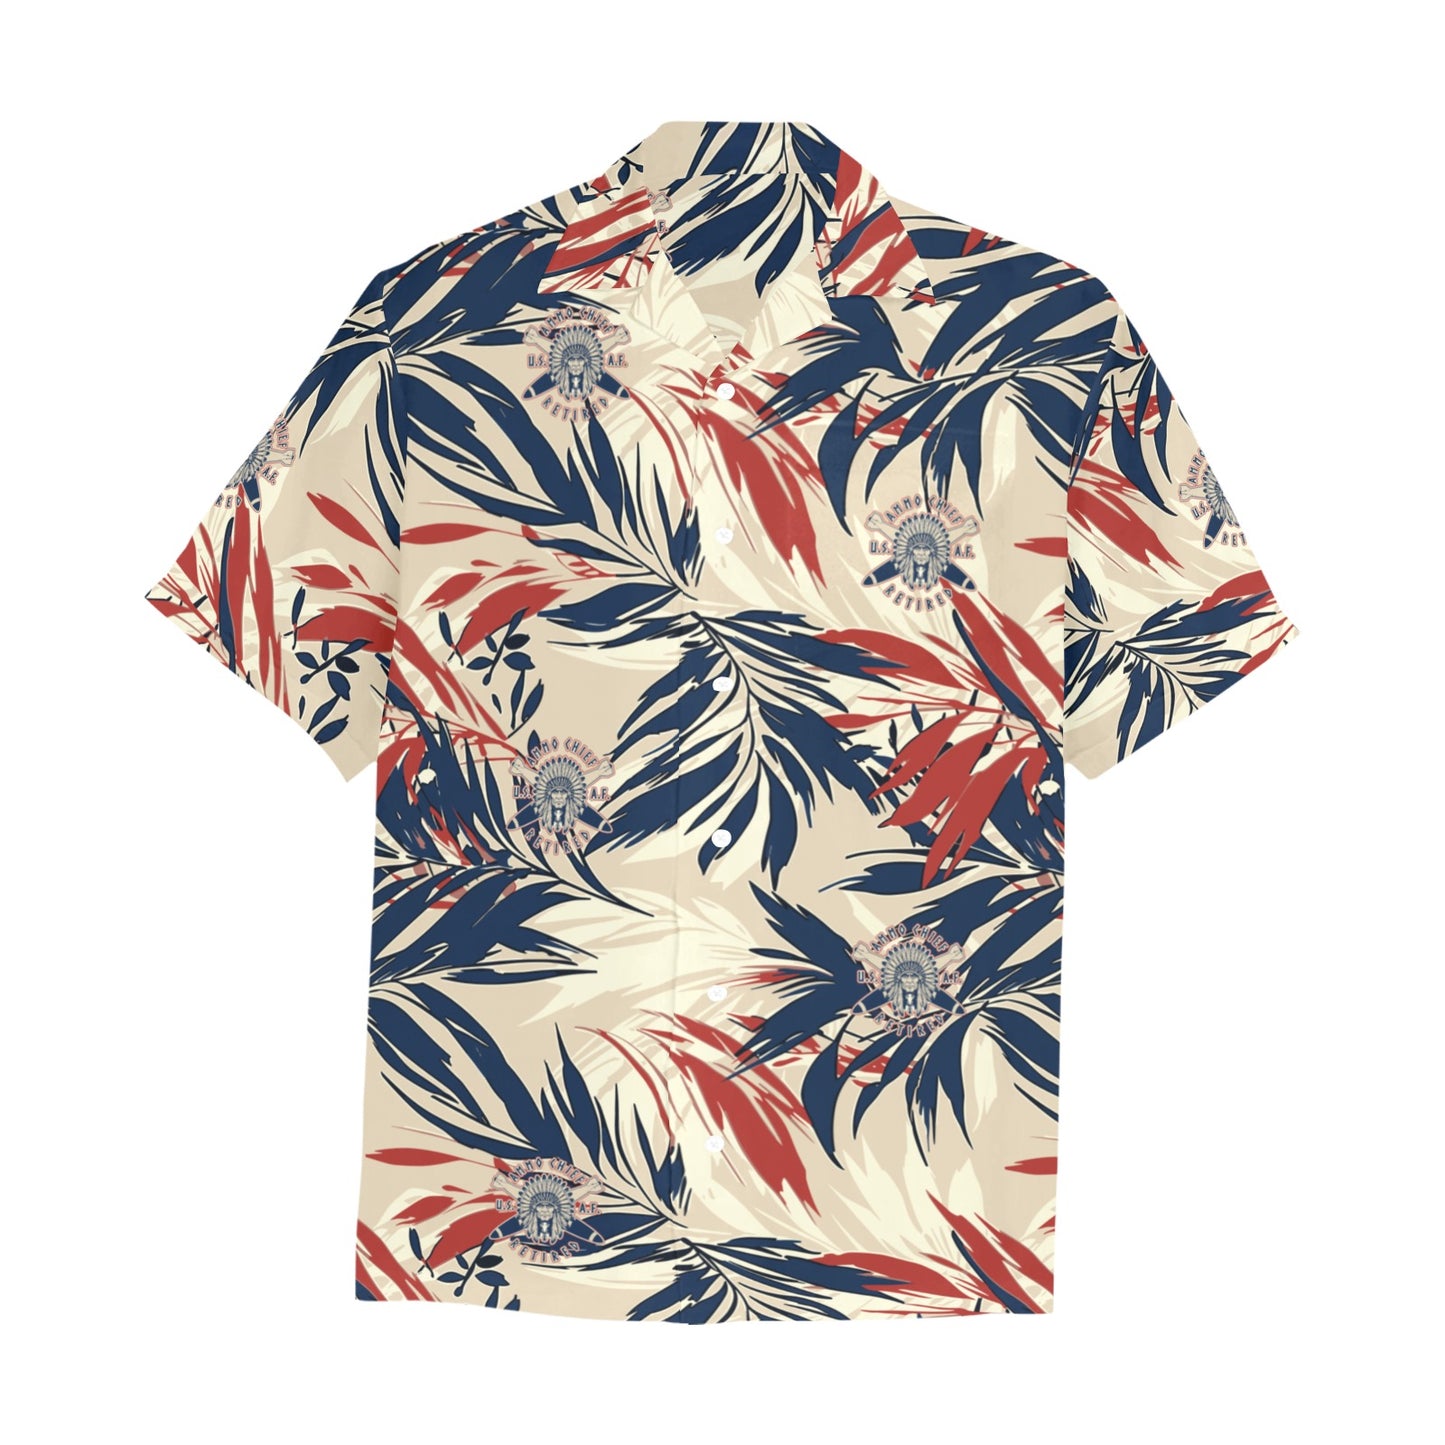 AMMO Chief Retired With Tropical Leaves and Custom Made Retired AMMO Chief Logos Men's Hawaiian Shirt With Left Chest Pocket